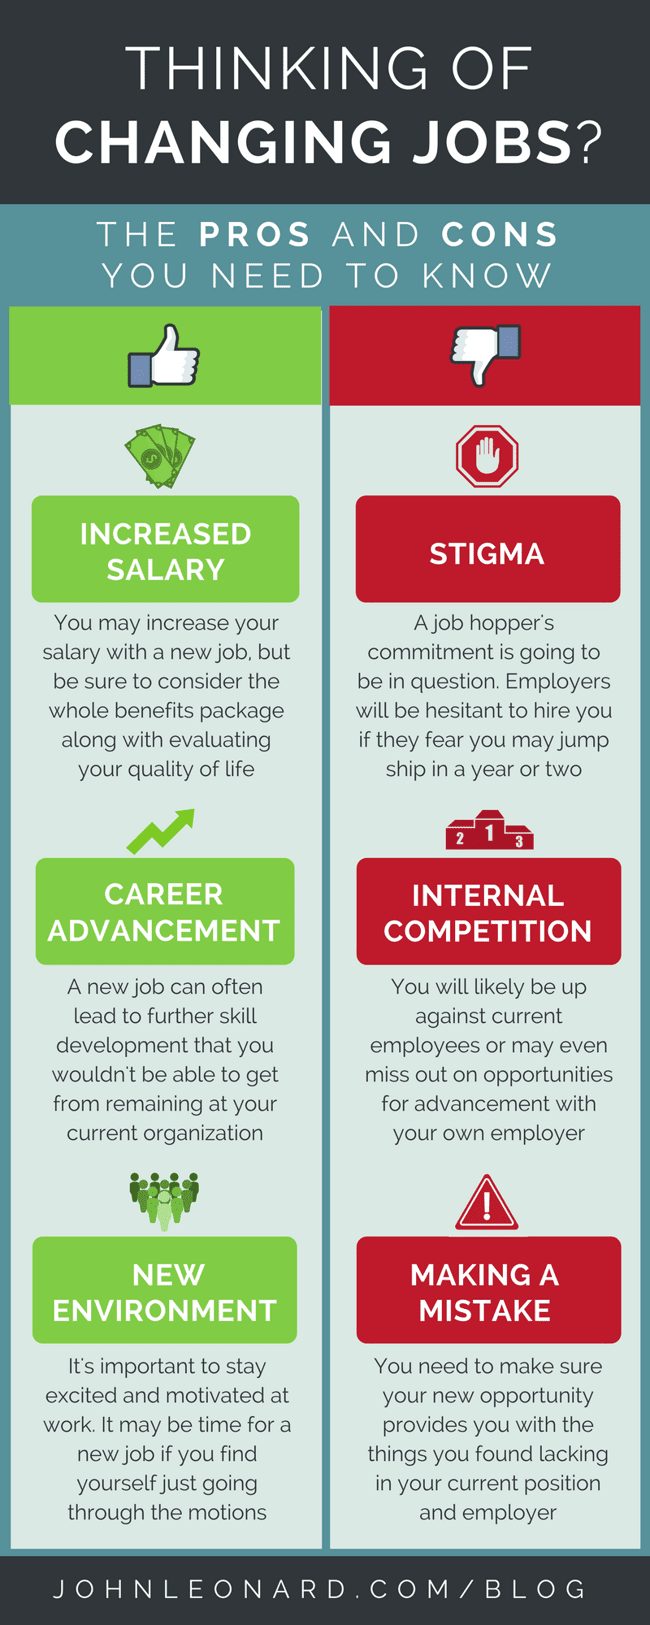 Thinking of Changing Jobs- Pros and Cons Infographic